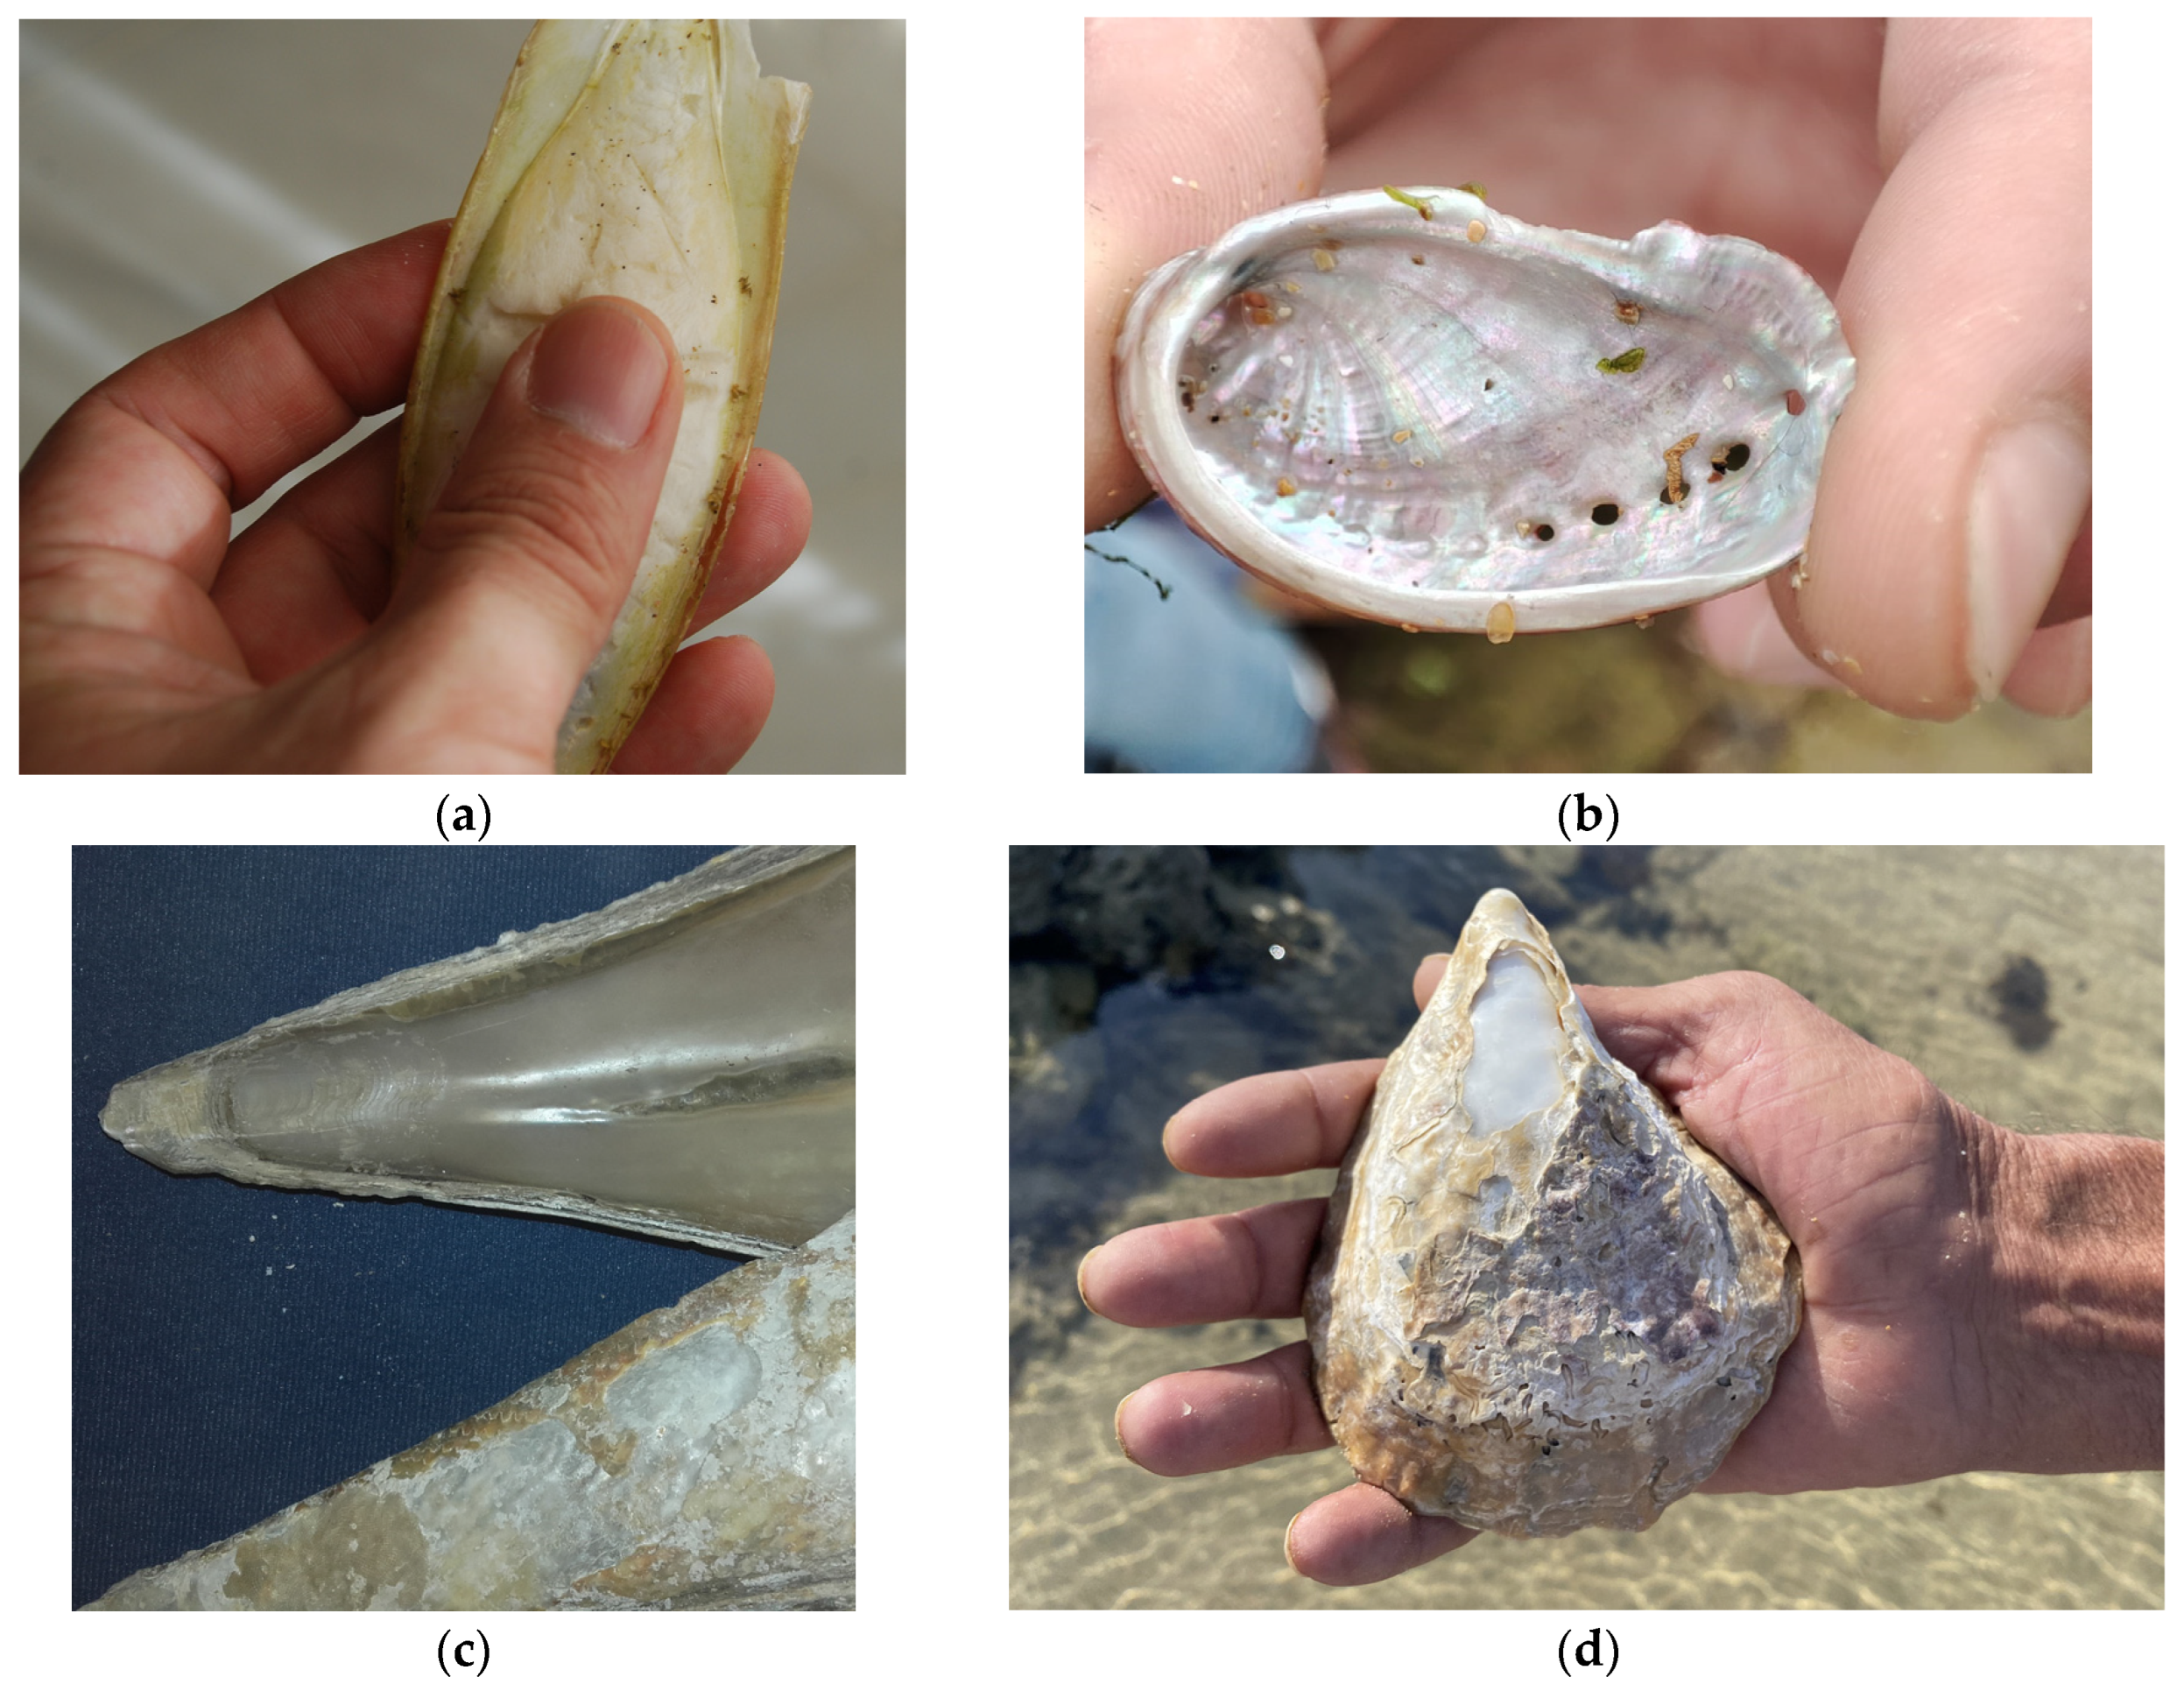 Mother of Pearl: Continuous Inspiration for Material Development